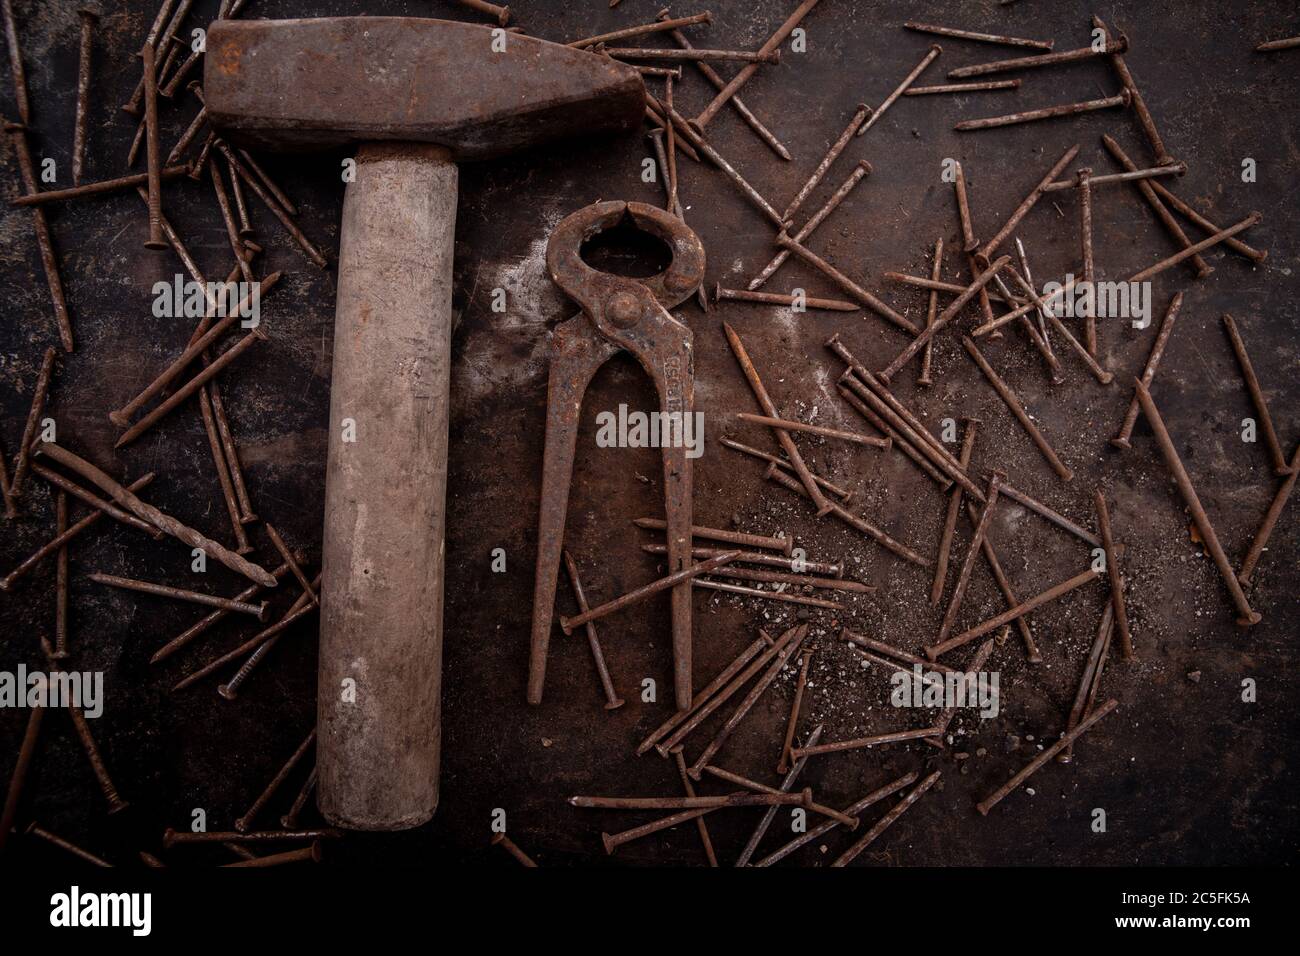 old tools hammer, pliers and nails heavily rusted lie on a metal dark background Stock Photo